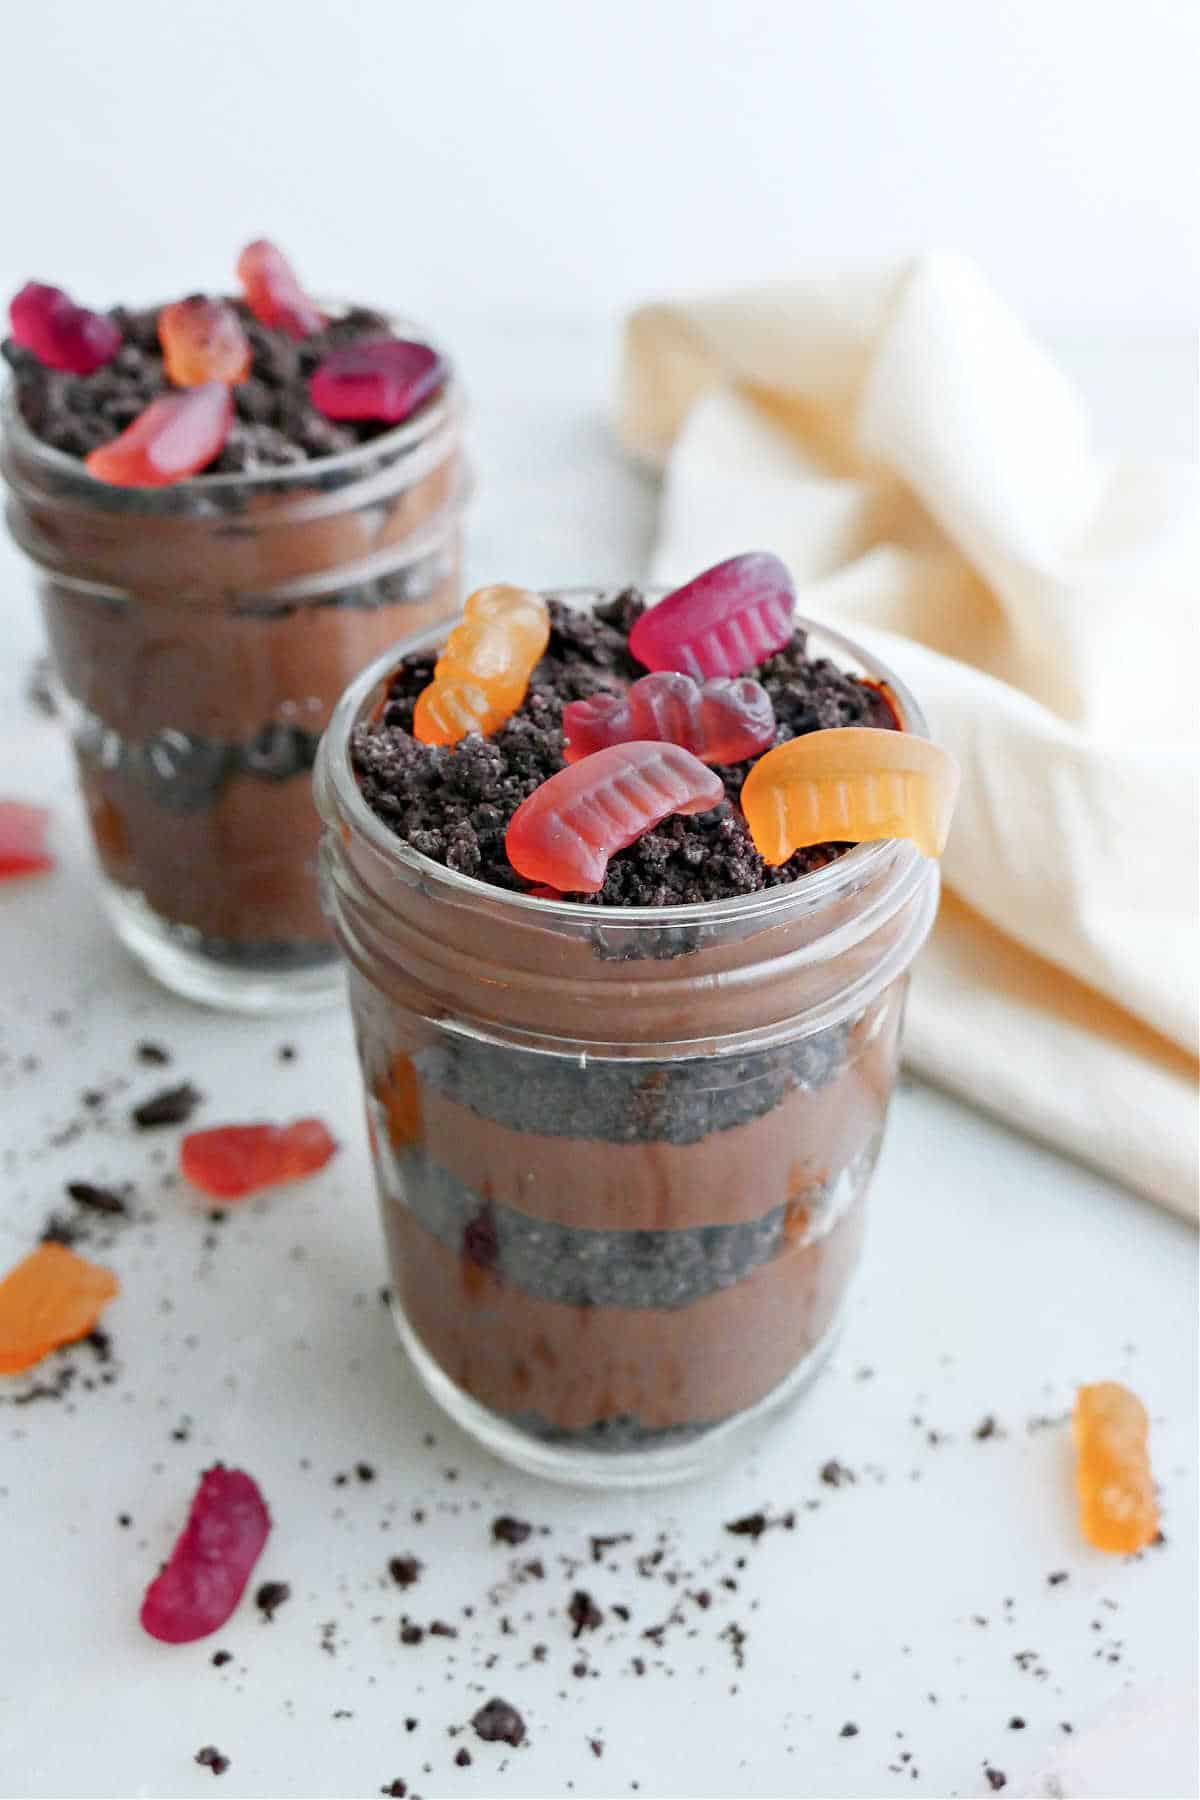 two dirt cups made with layers of tofu pudding, Oreo crumbs, and gummy candies